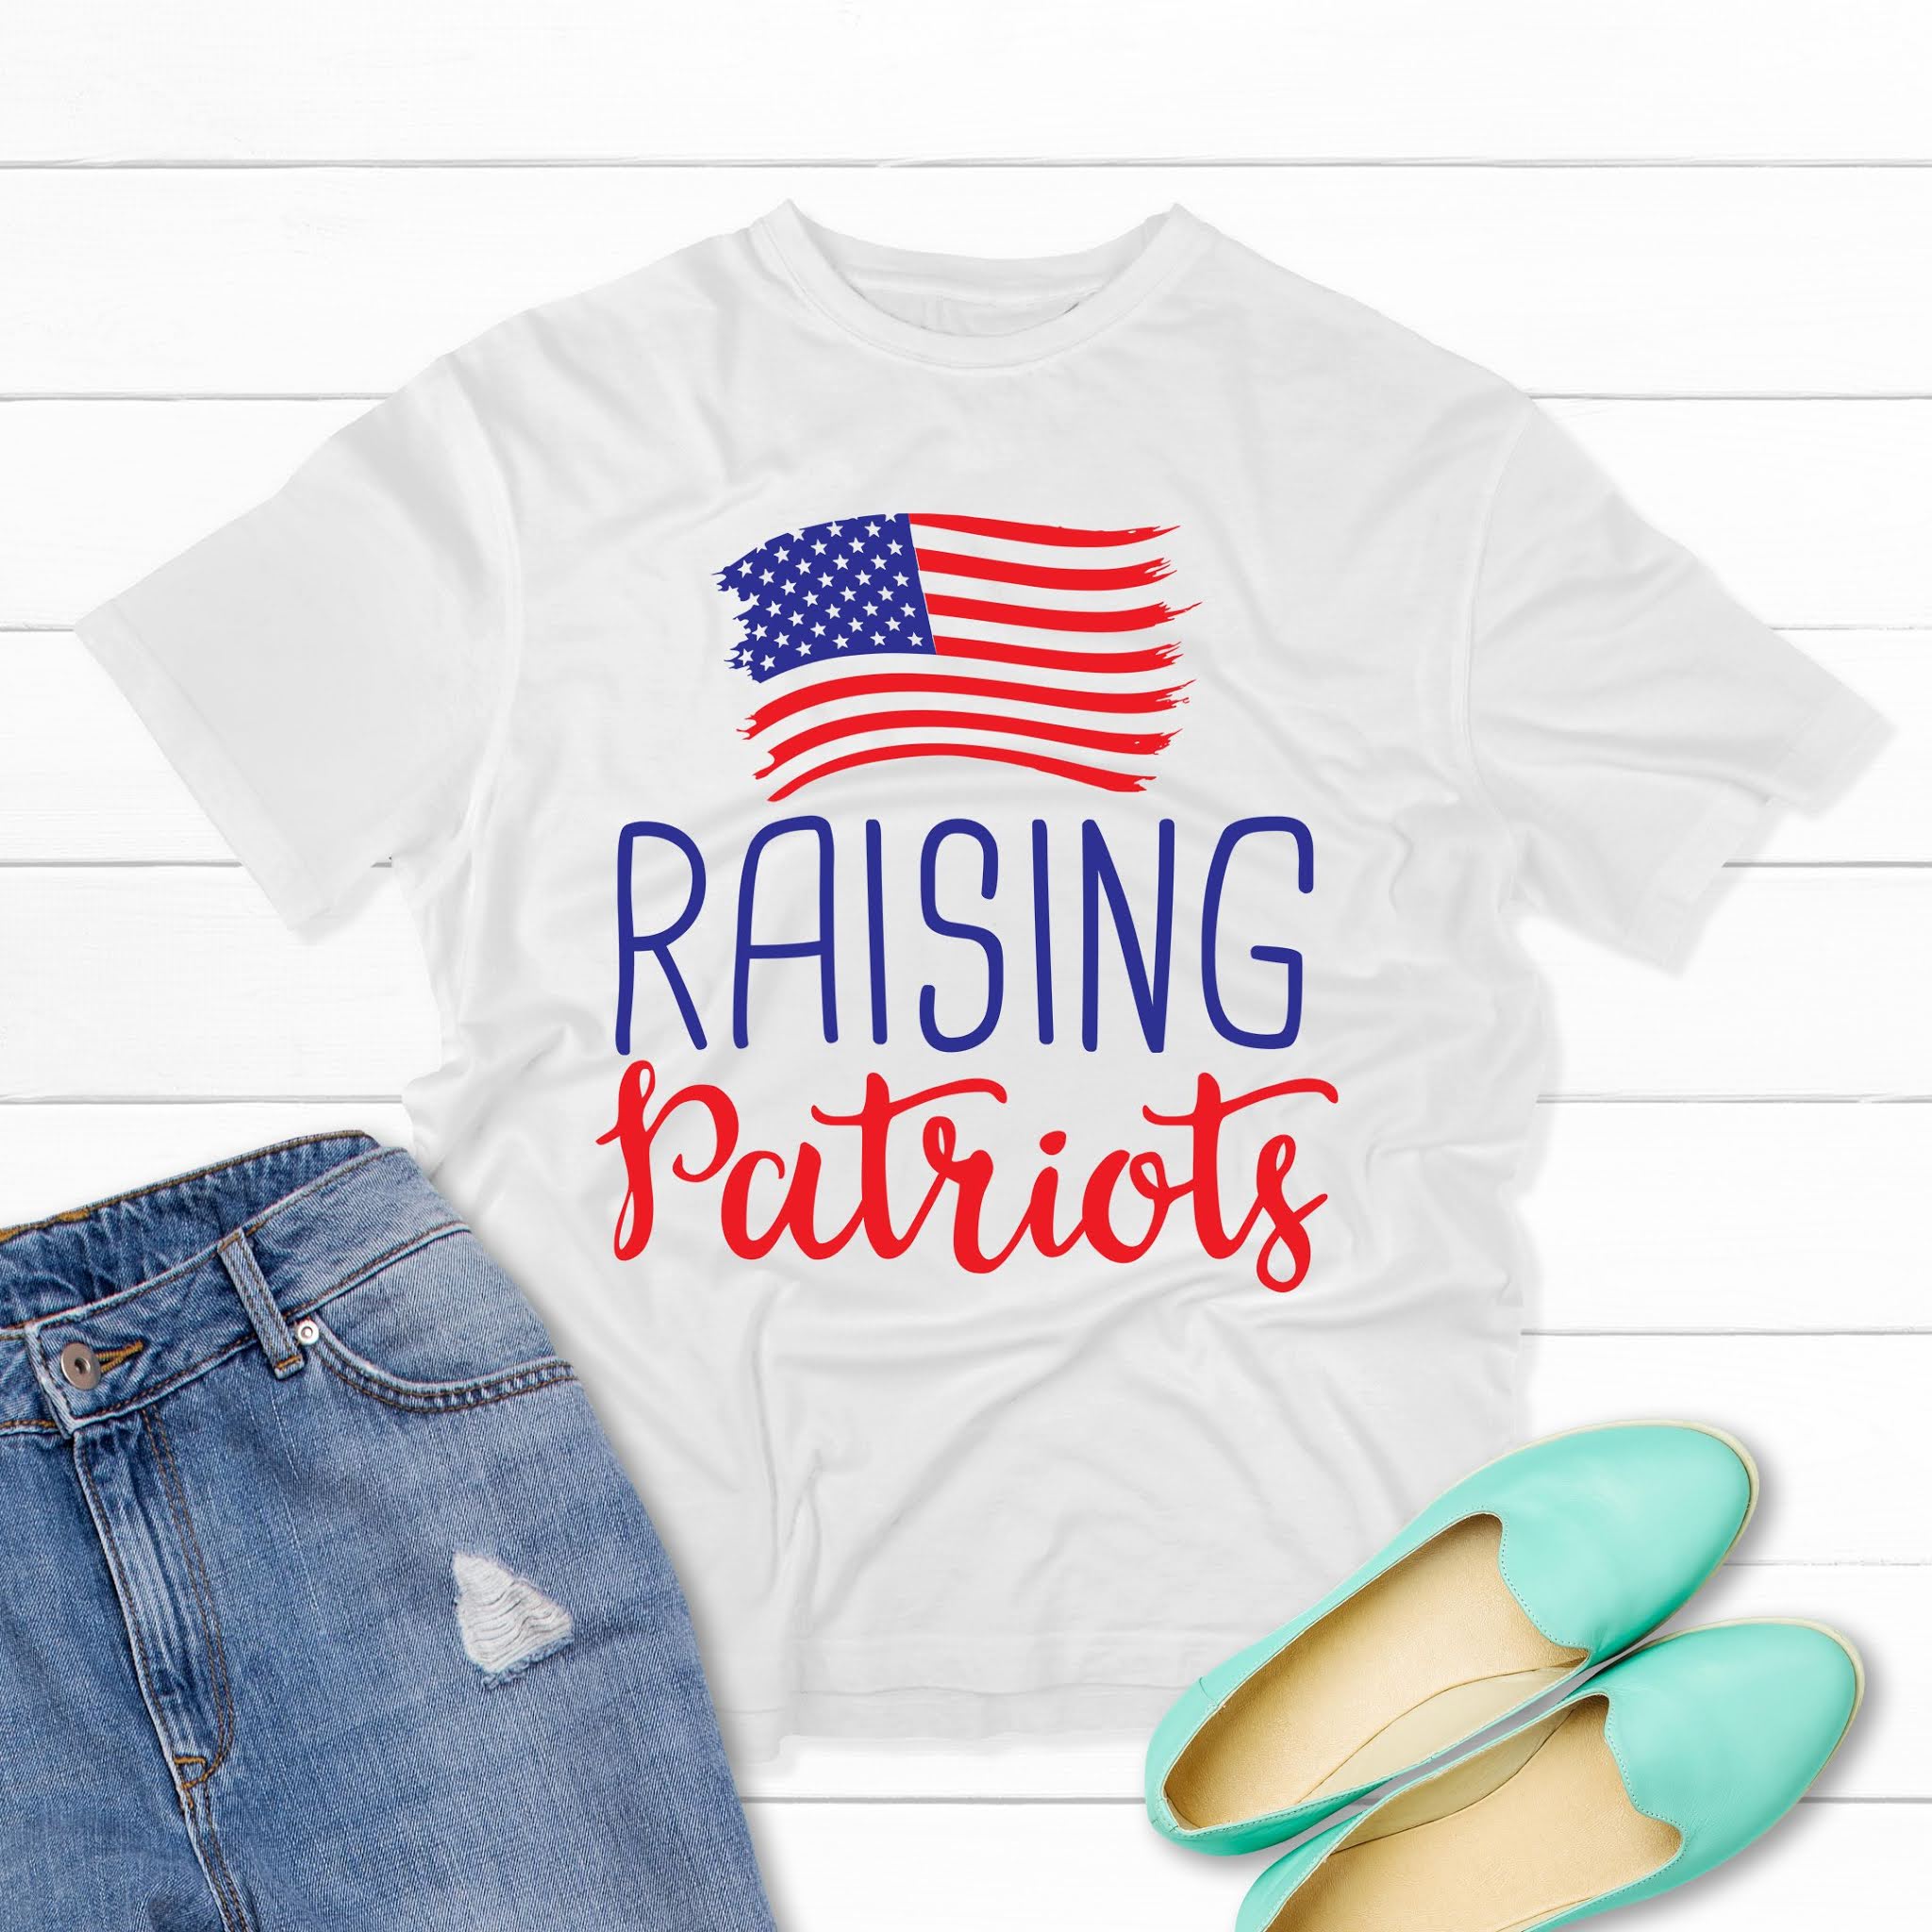 Where To Find Loads Of Free Patriotic SVGS & Project Ideas